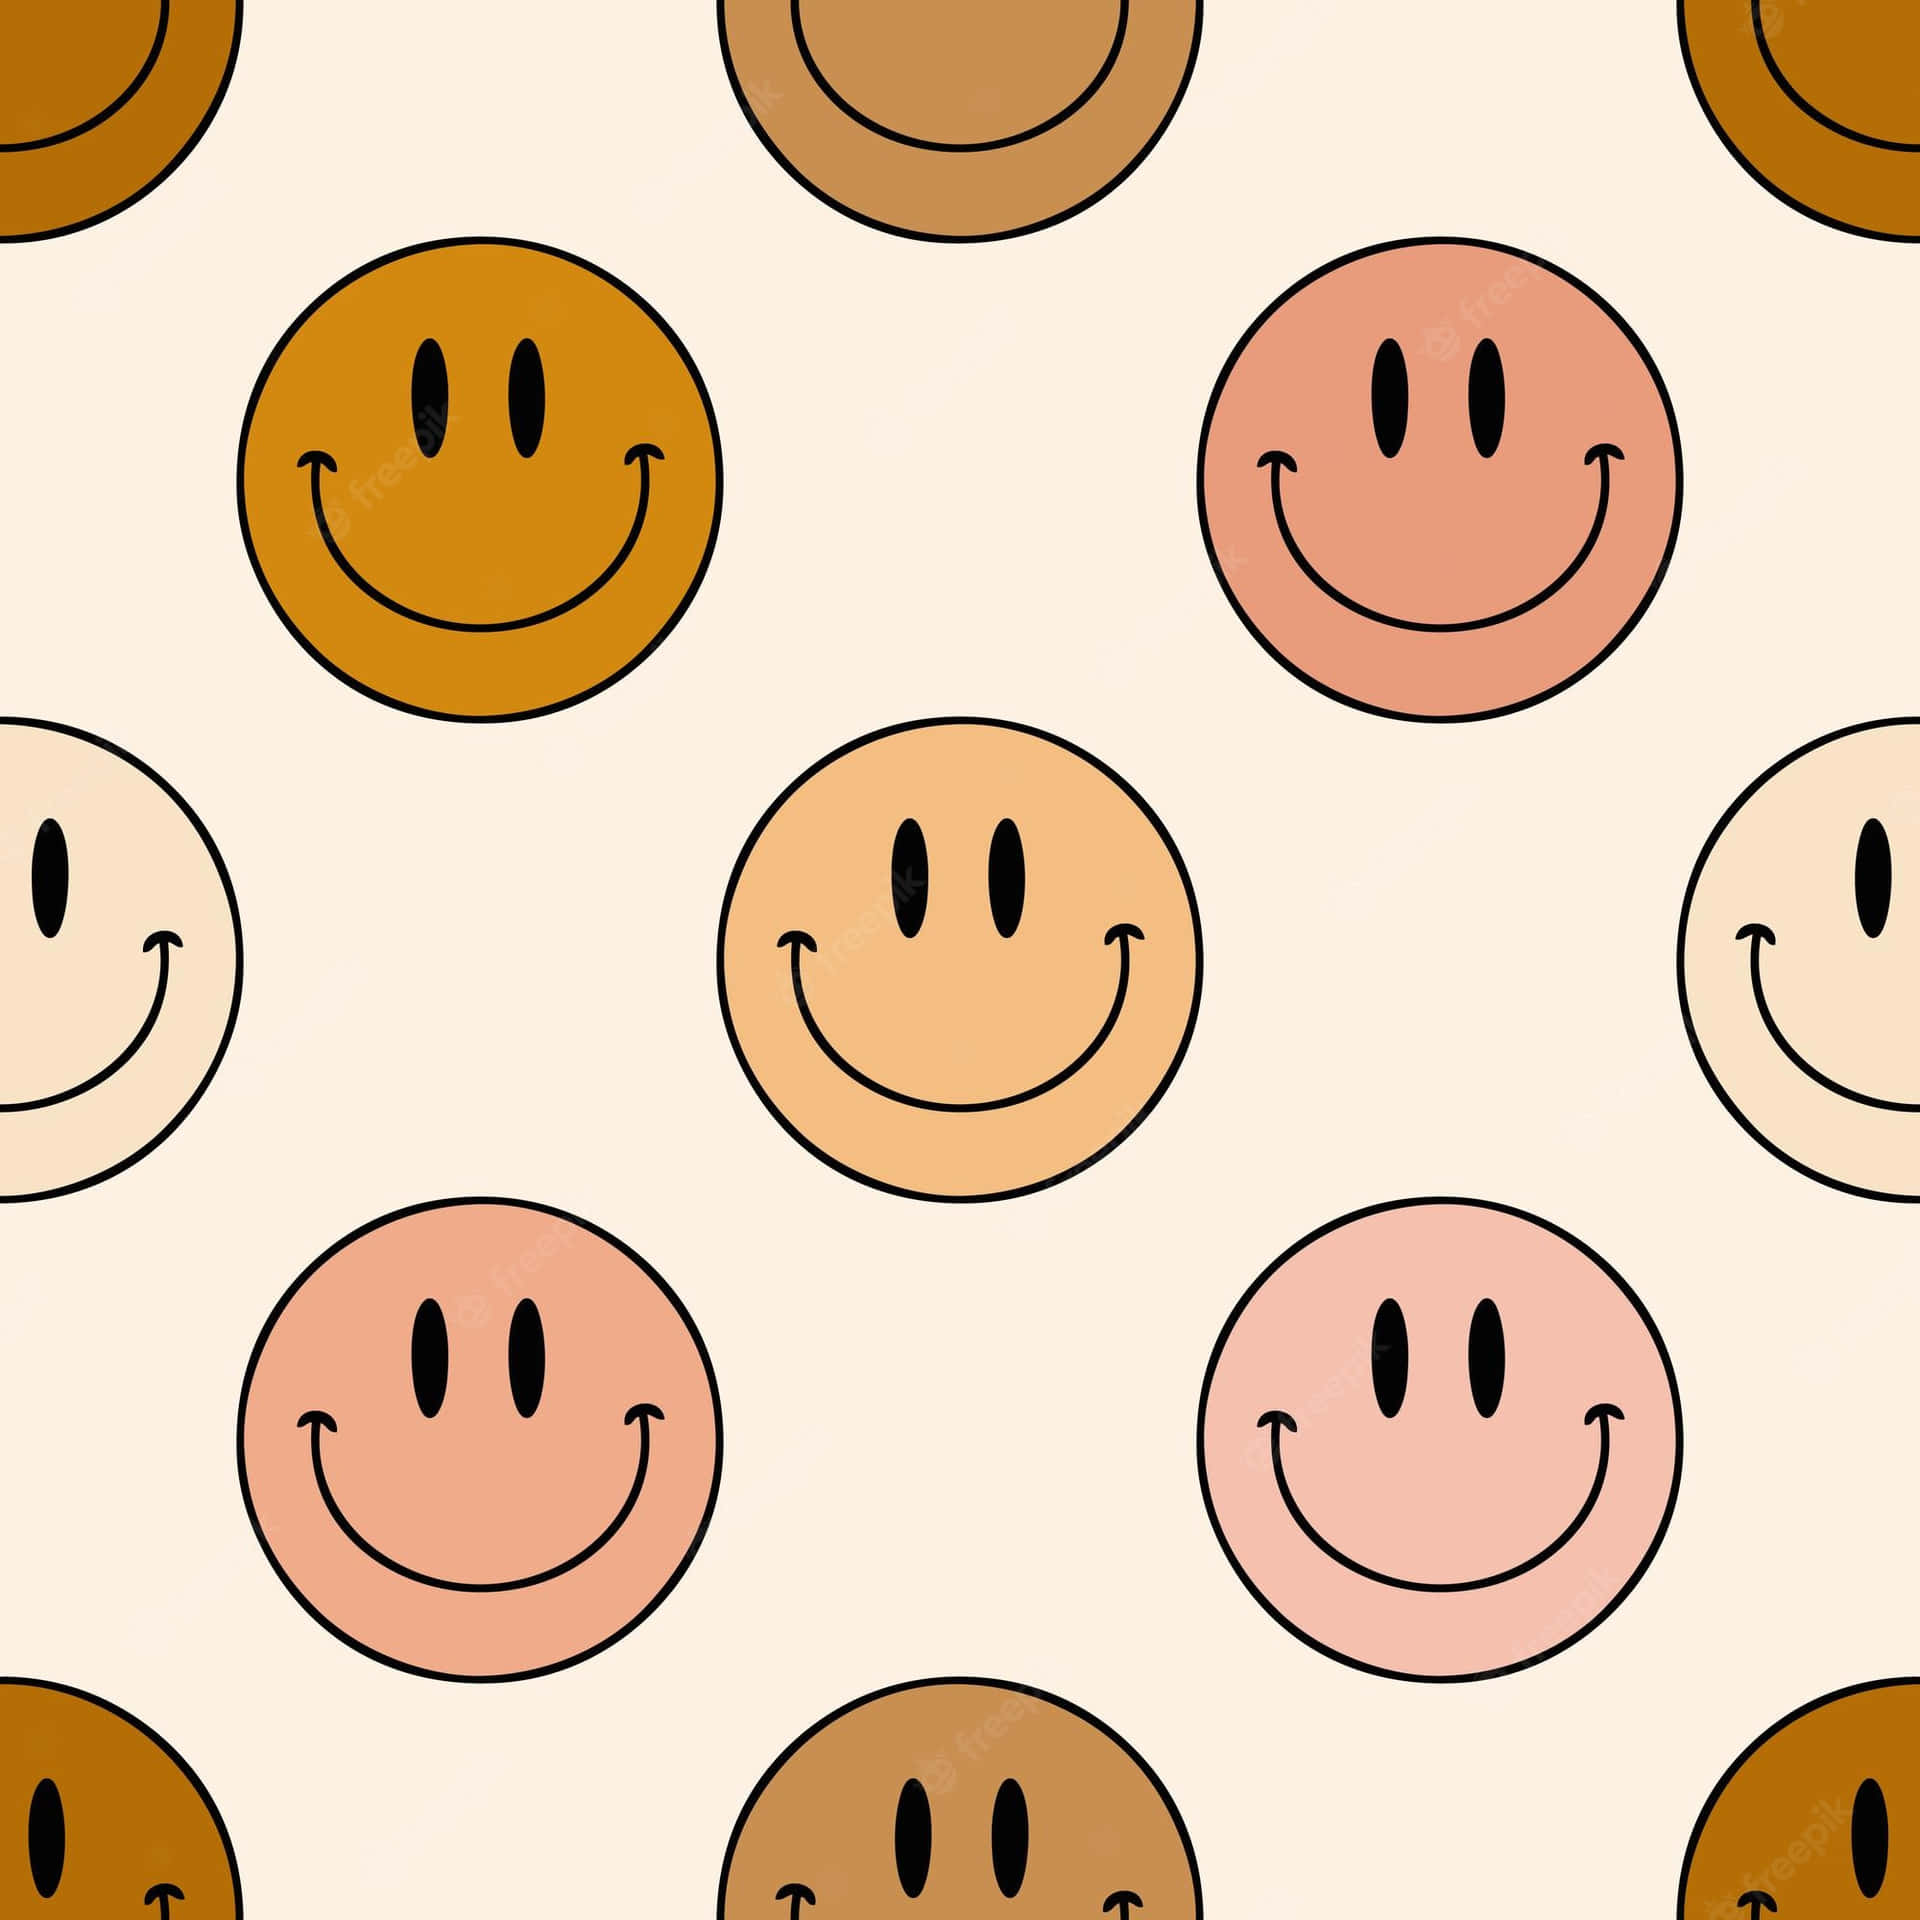 A pattern of different colored smiley faces on a white background - Emoji, smile, Smiley